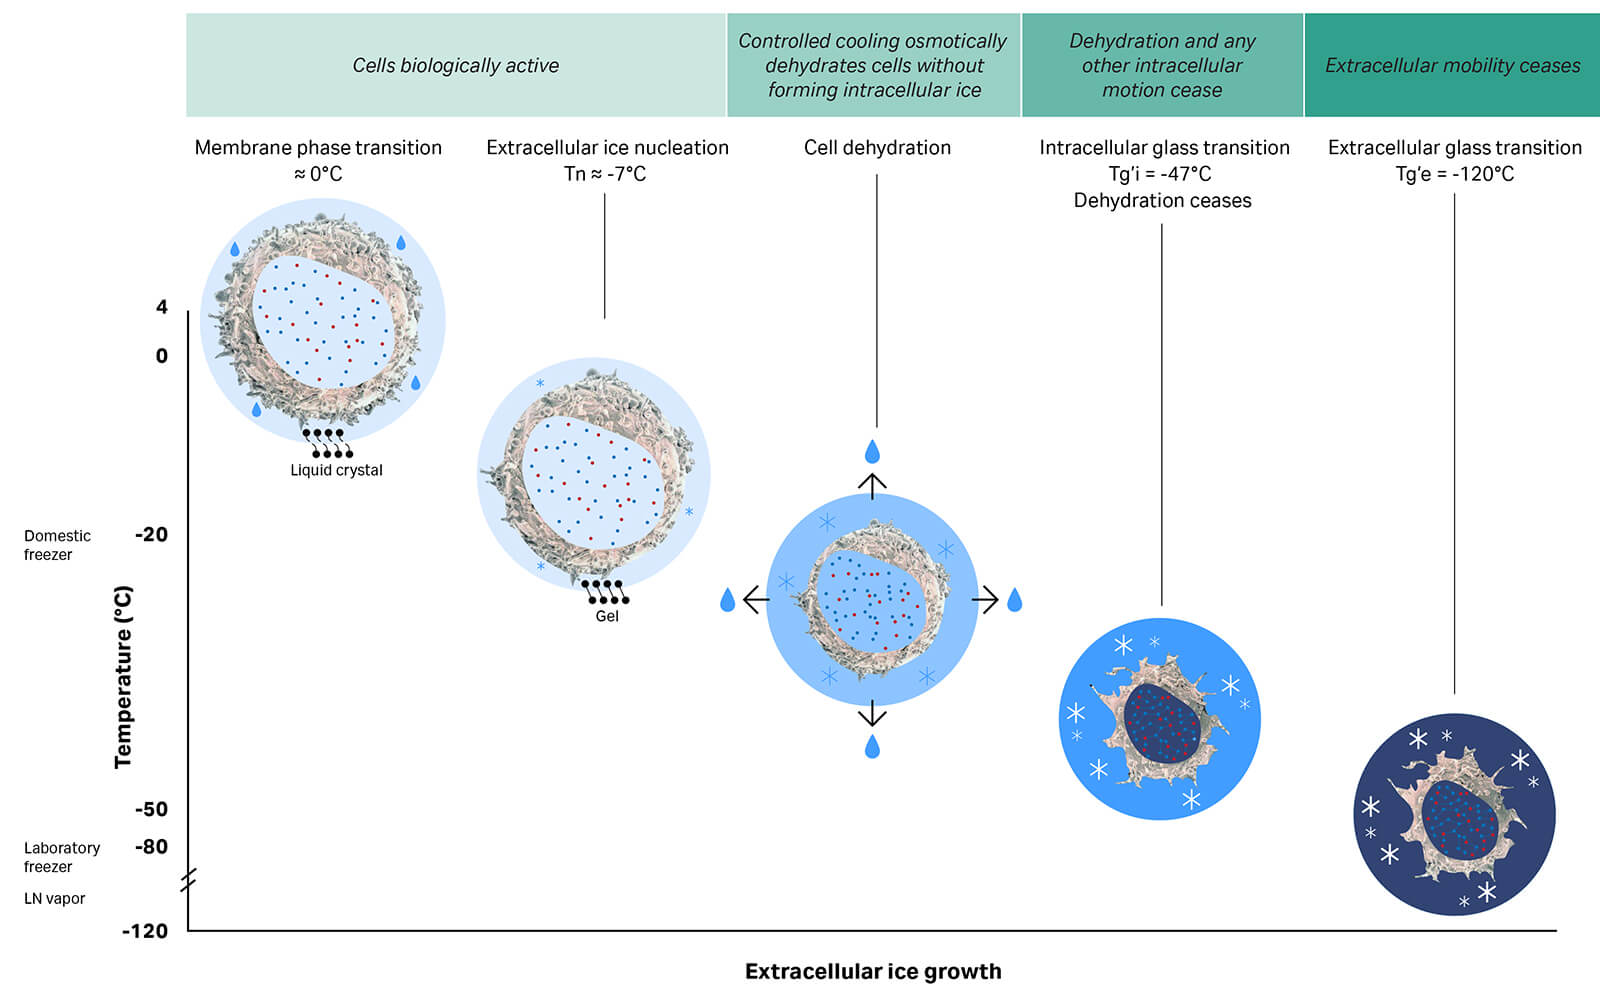 Process of cryopreservation of cells